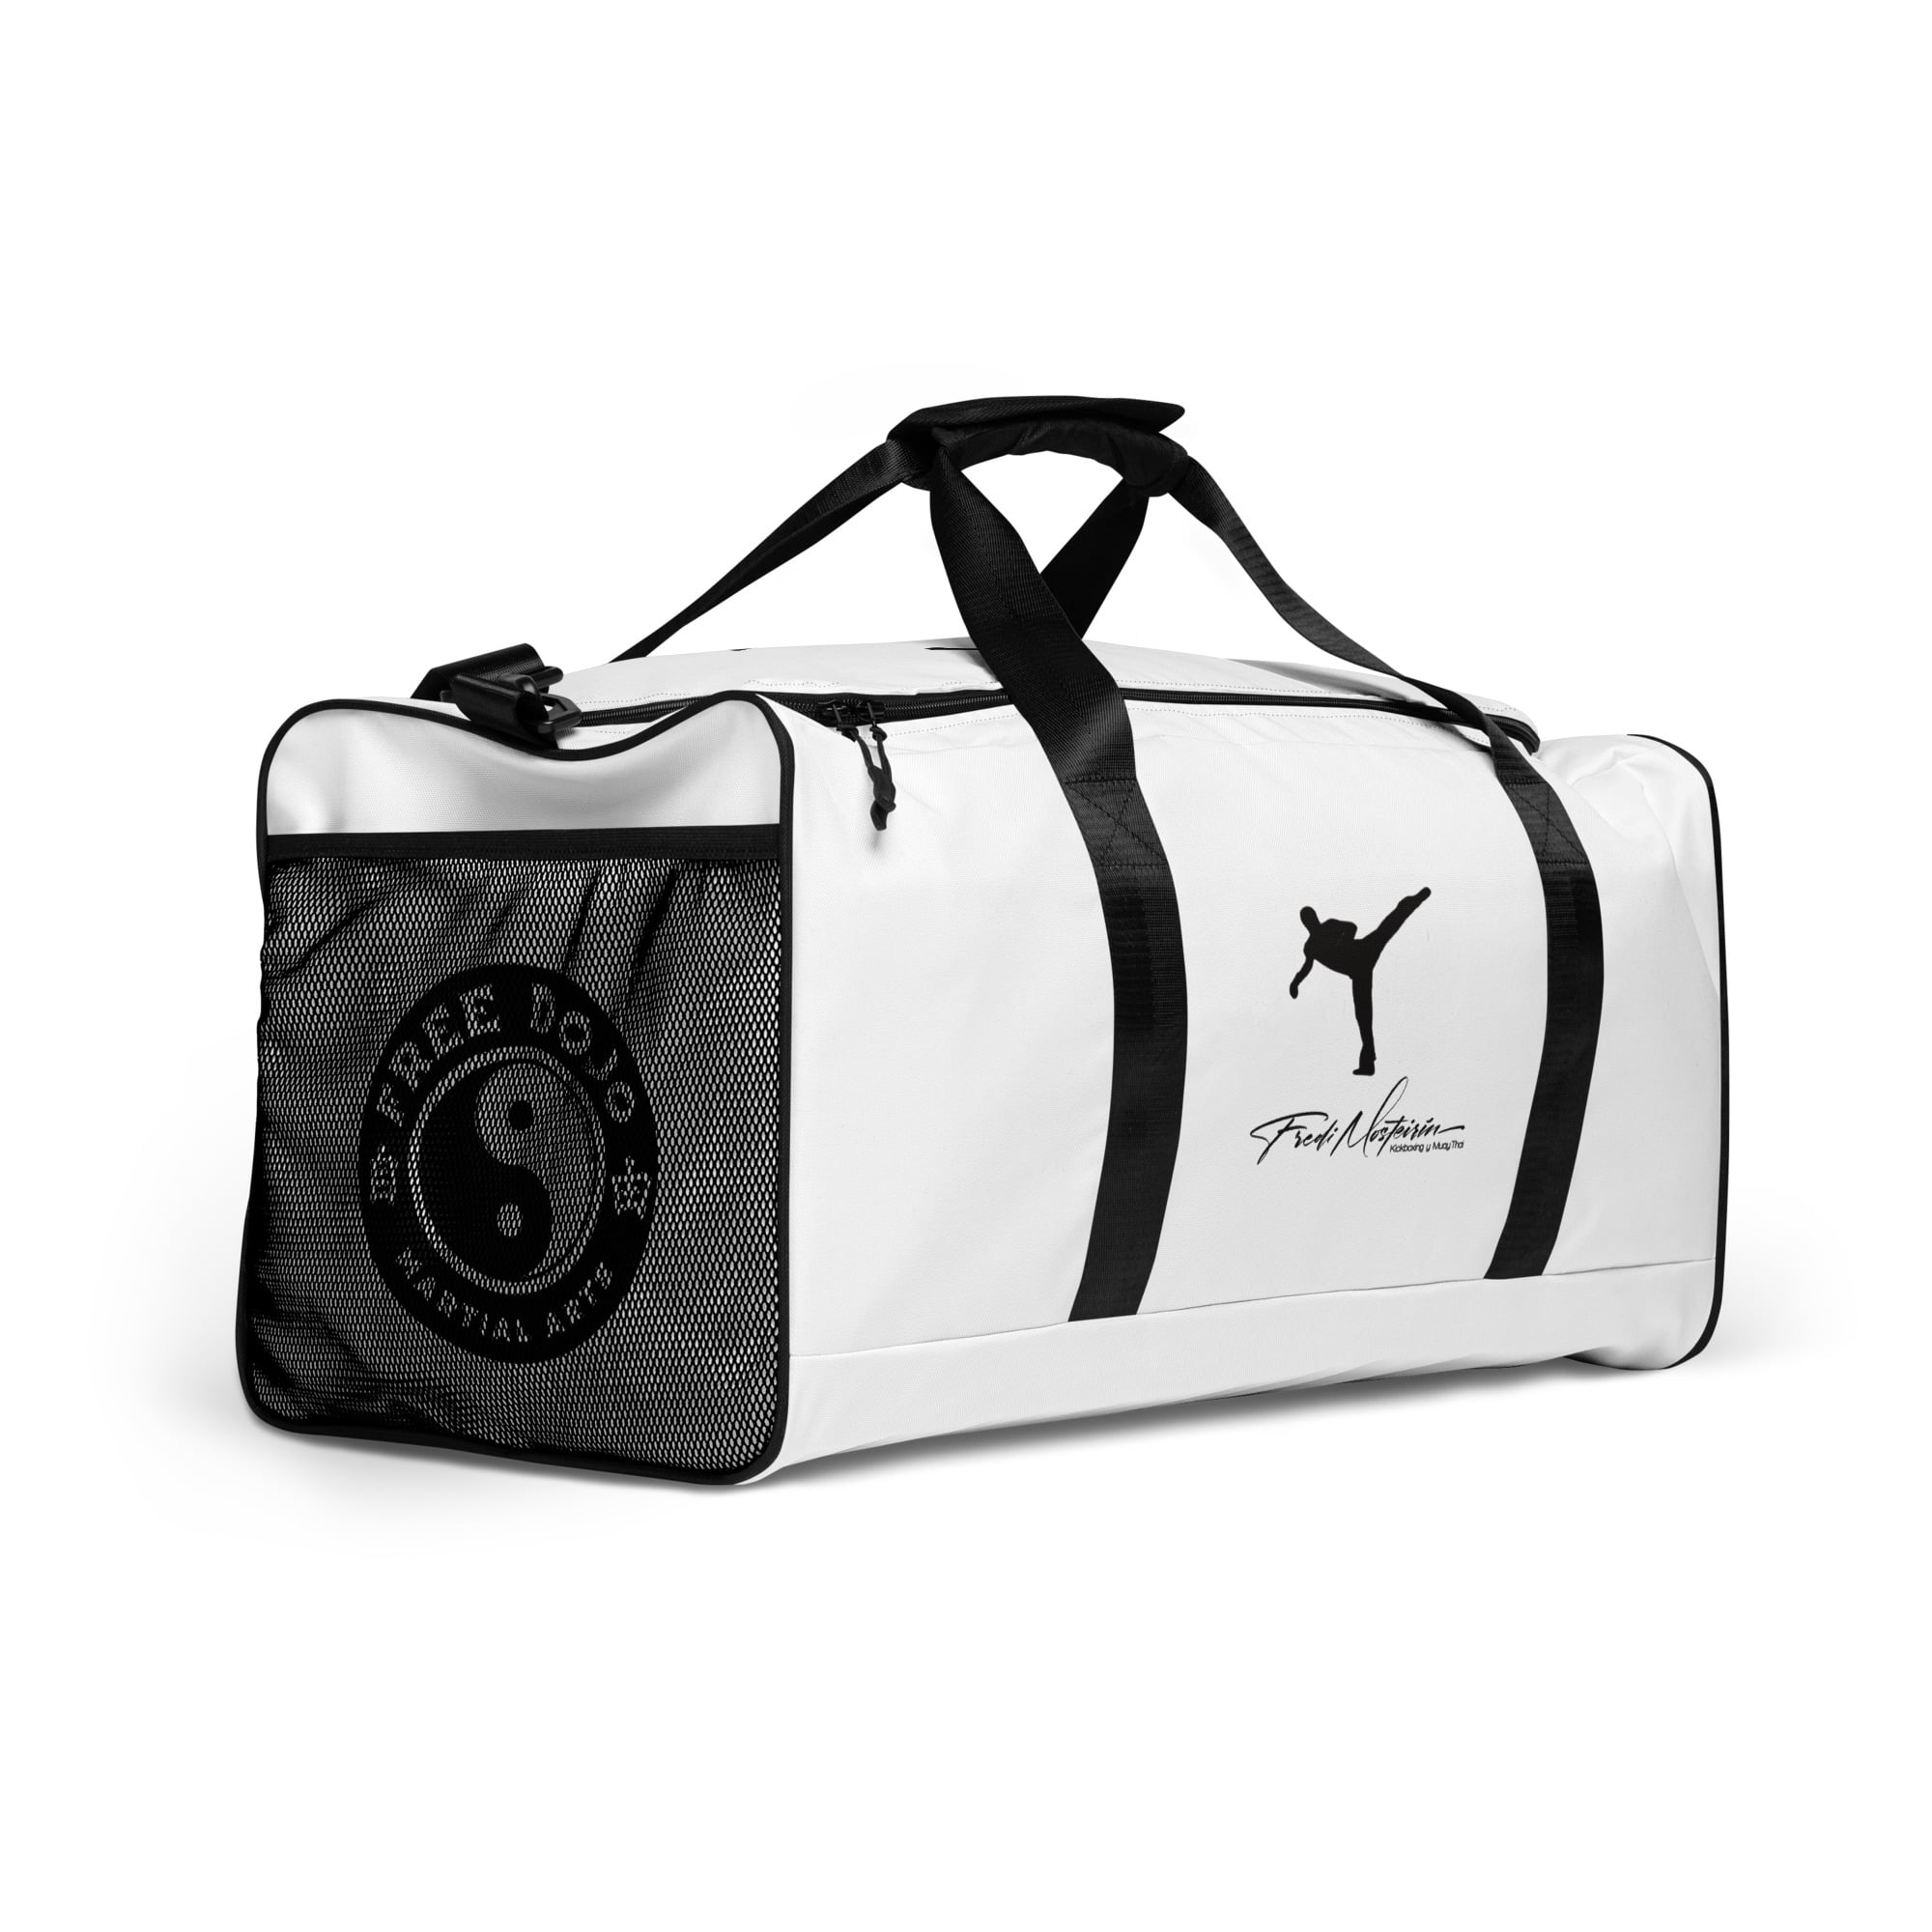 all-over-print-duffle-bag-white-right-front-64db67d410033.jpg